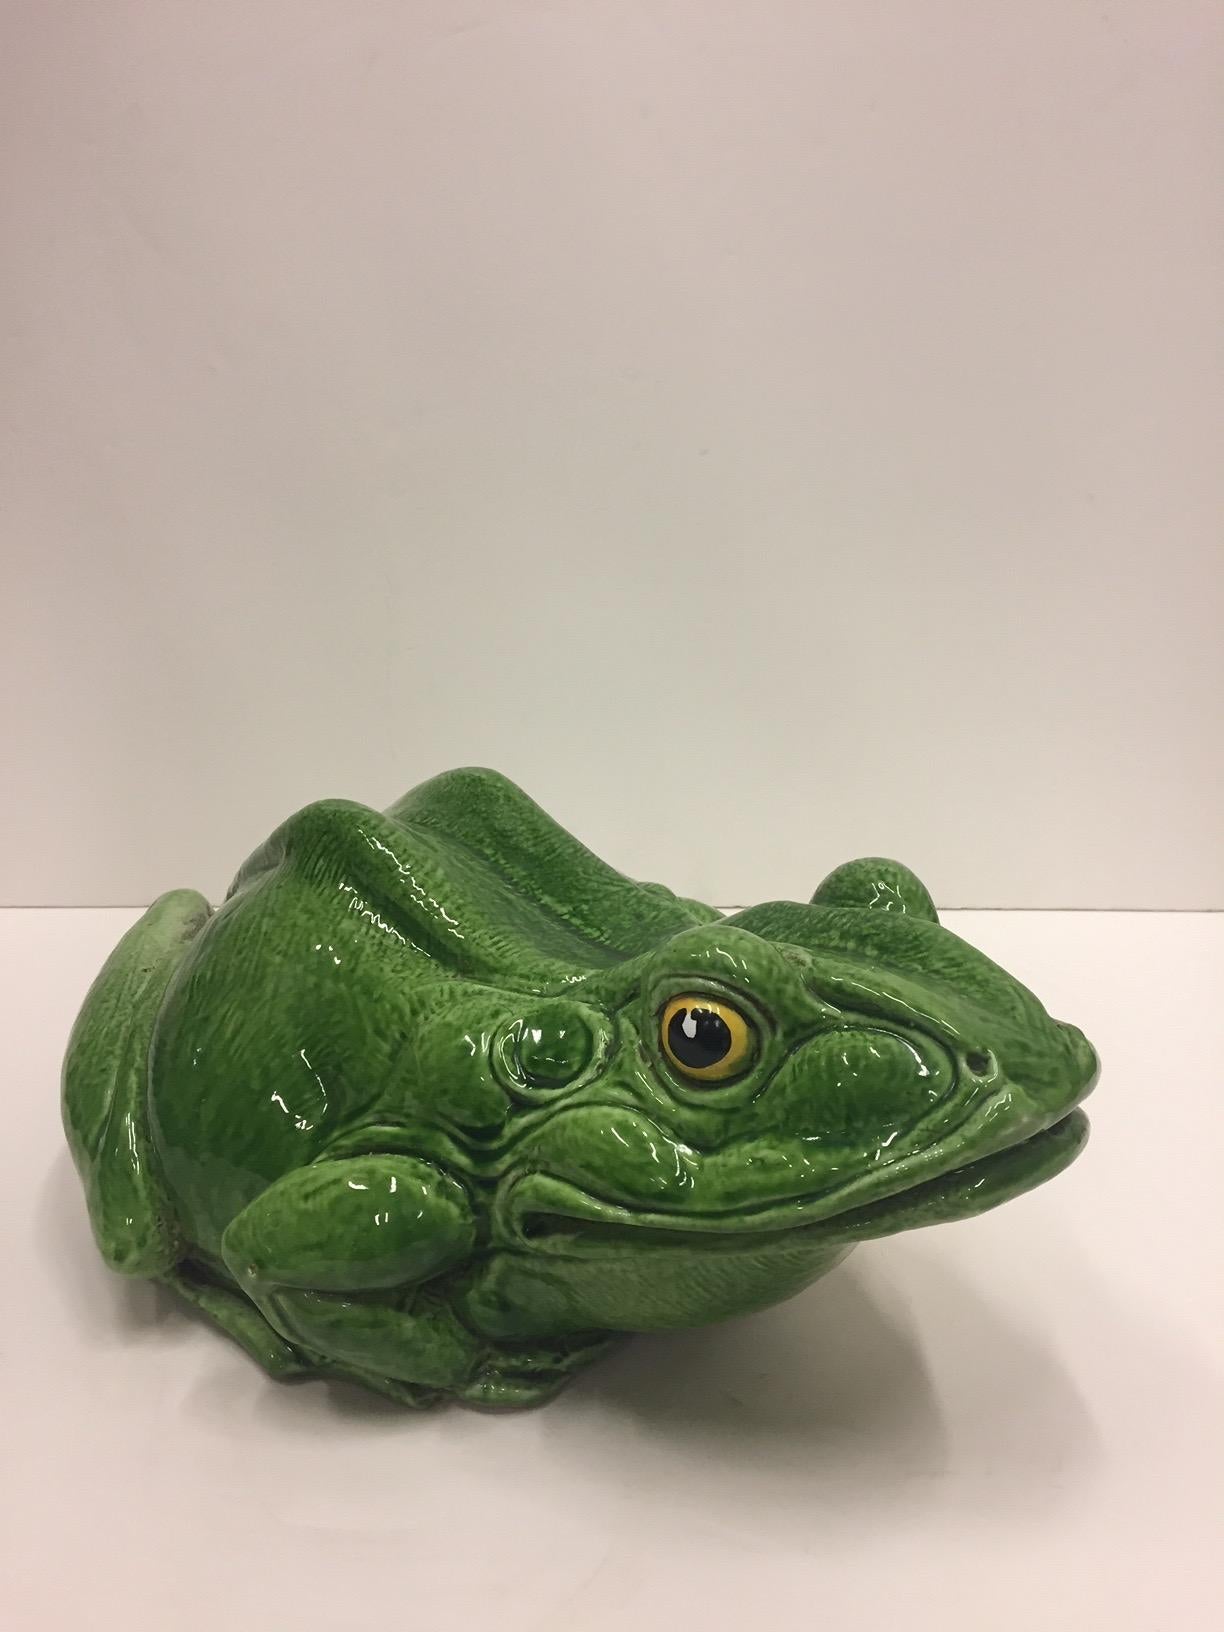 Frog Lover's Fun Glazed Terracotta Table Top Sculpture In Good Condition For Sale In Hopewell, NJ